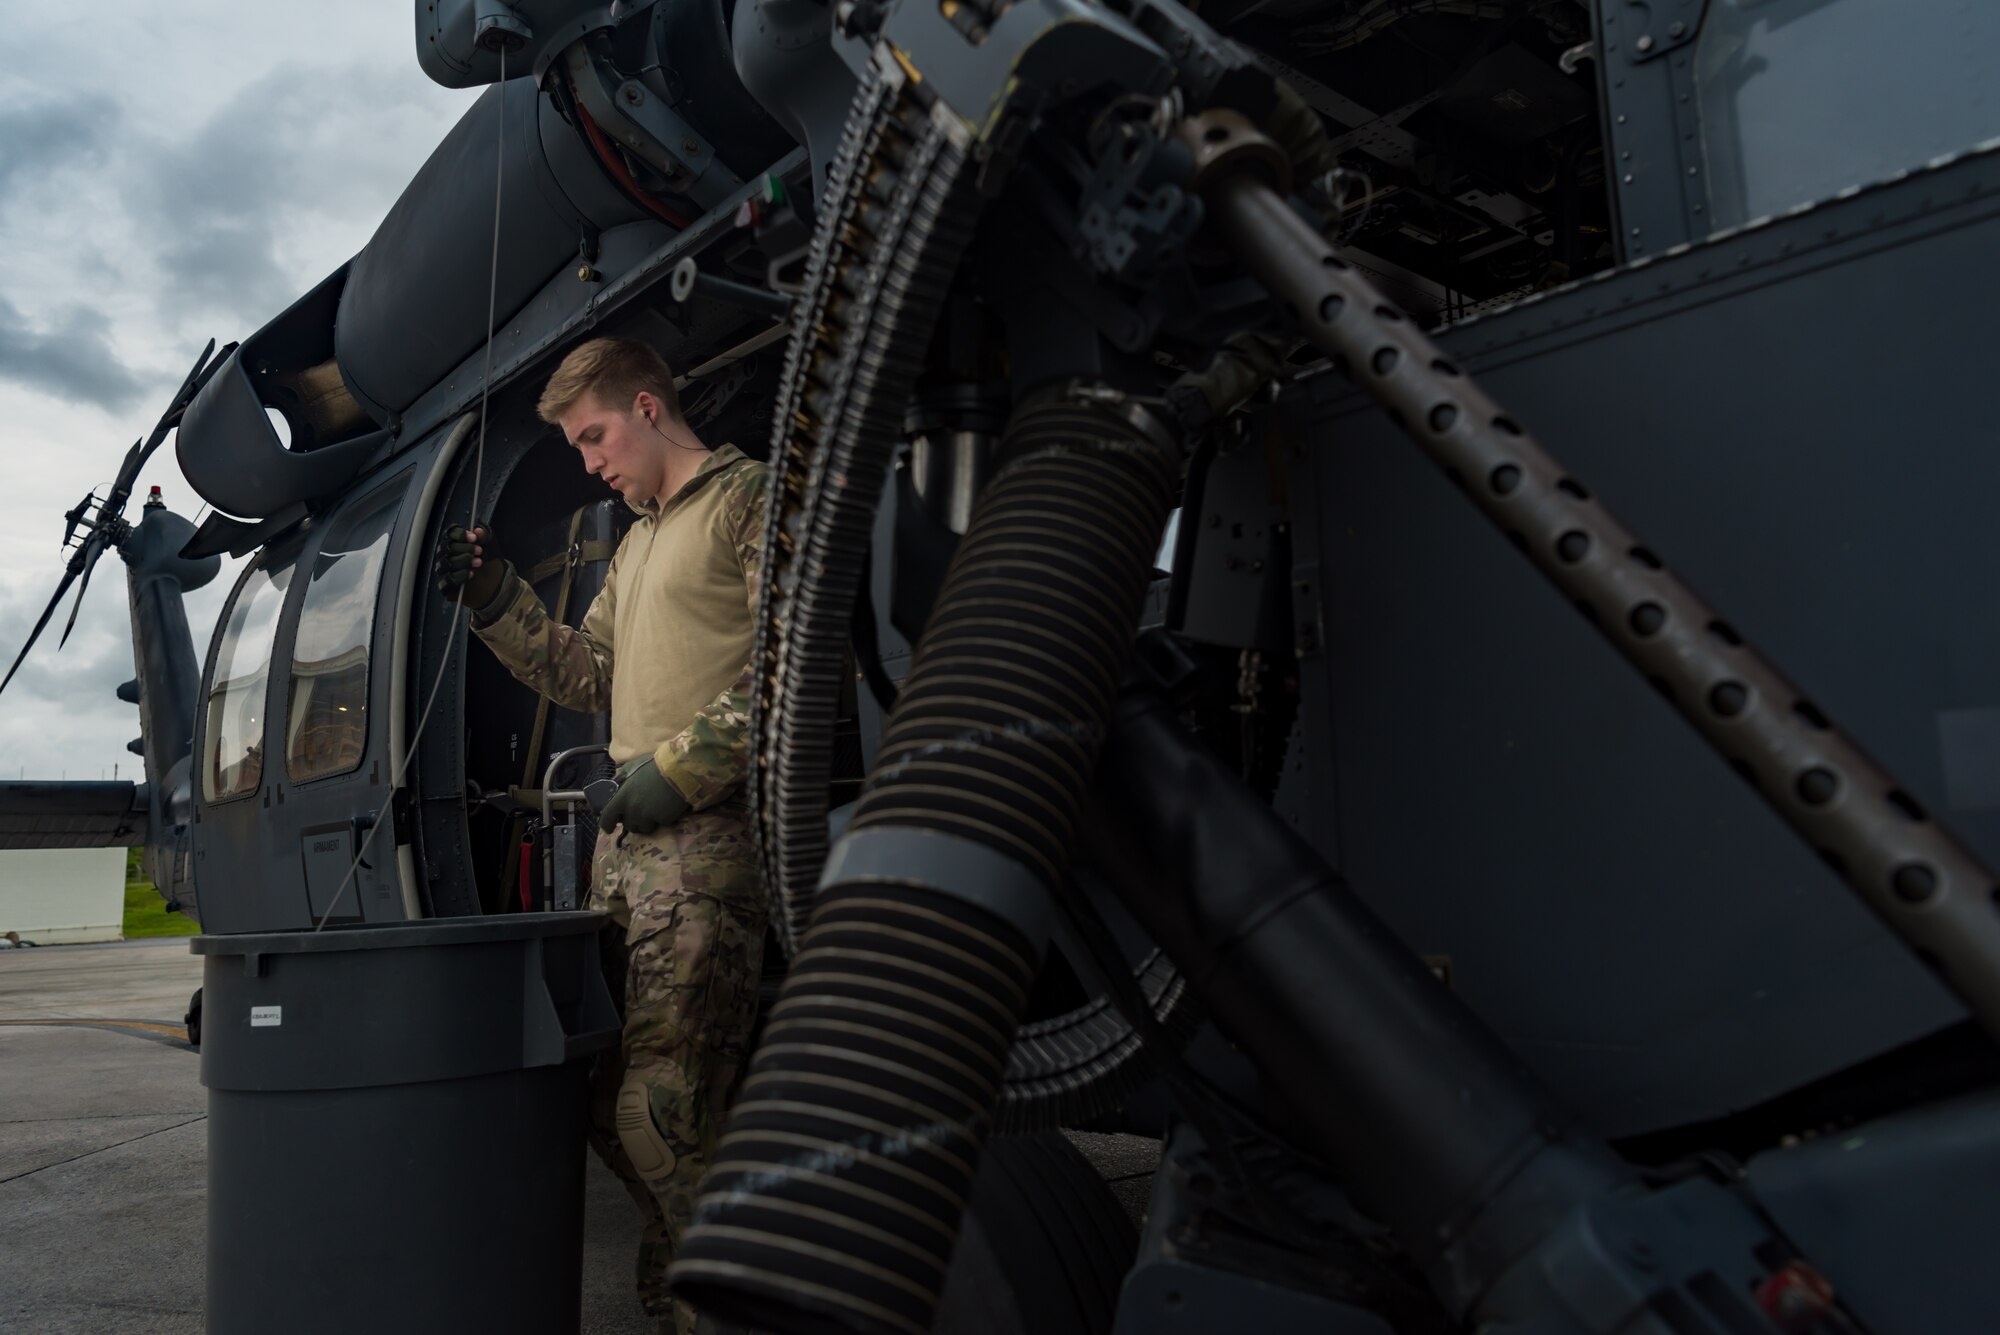 U.S. Air Force Senior Airman Chandler Hoskinson, 33rd Rescue Squadron special mission aviator, inspects the hoist cable on an HH-60G Pave Hawk May 8, 2019, on Kadena Air Base, Japan.